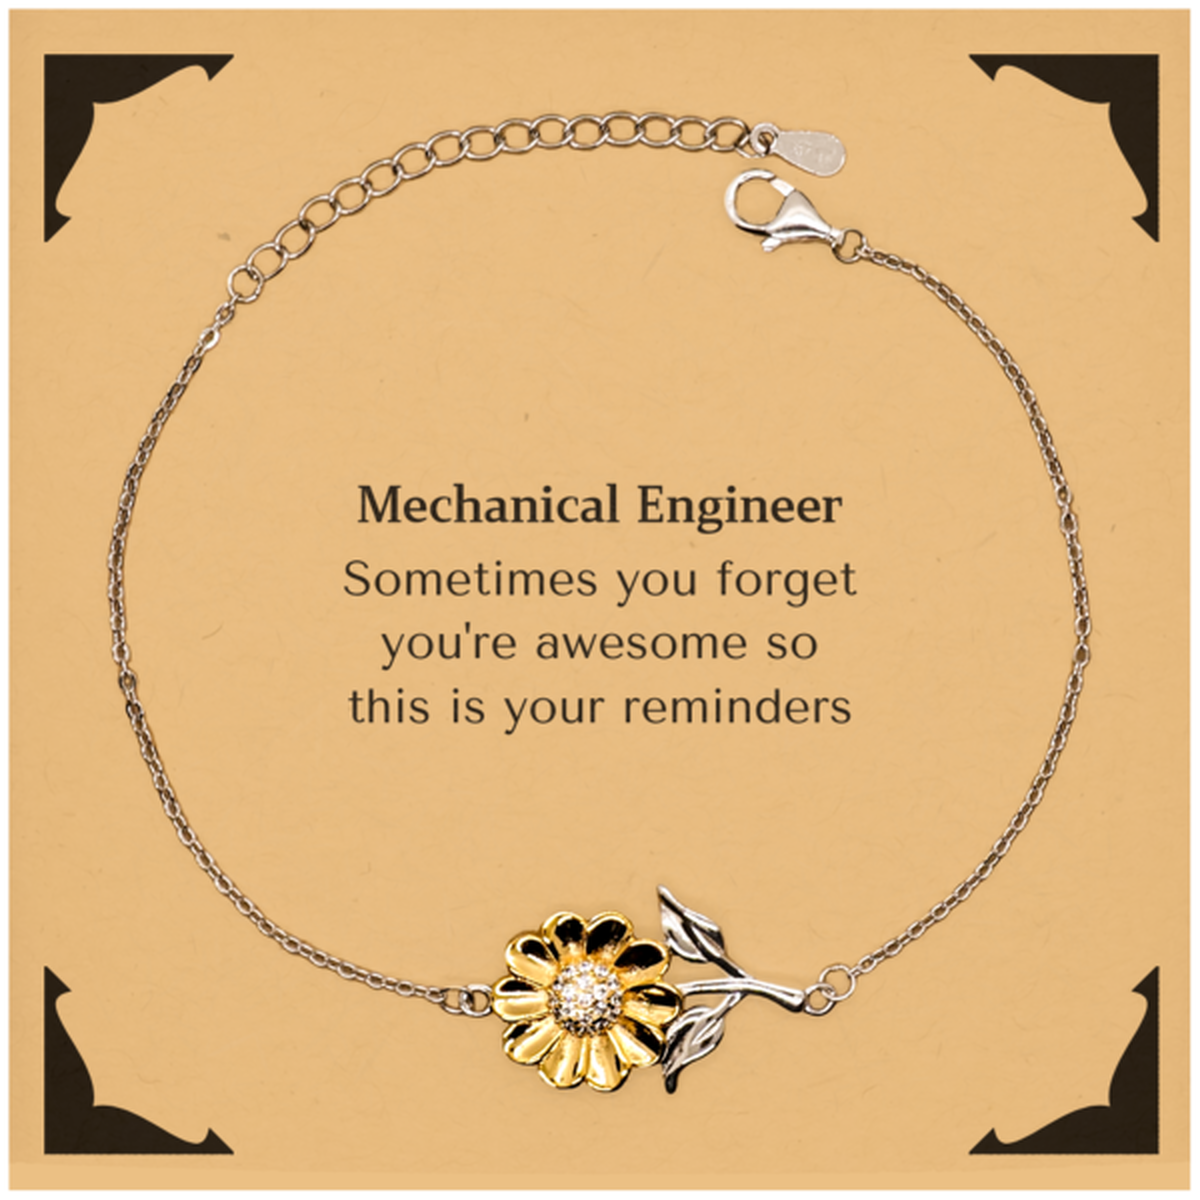 Sentimental Mechanical Engineer Sunflower Bracelet, Mechanical Engineer Sometimes you forget you're awesome so this is your reminders, Graduation Christmas Birthday Gifts for Mechanical Engineer, Men, Women, Coworkers